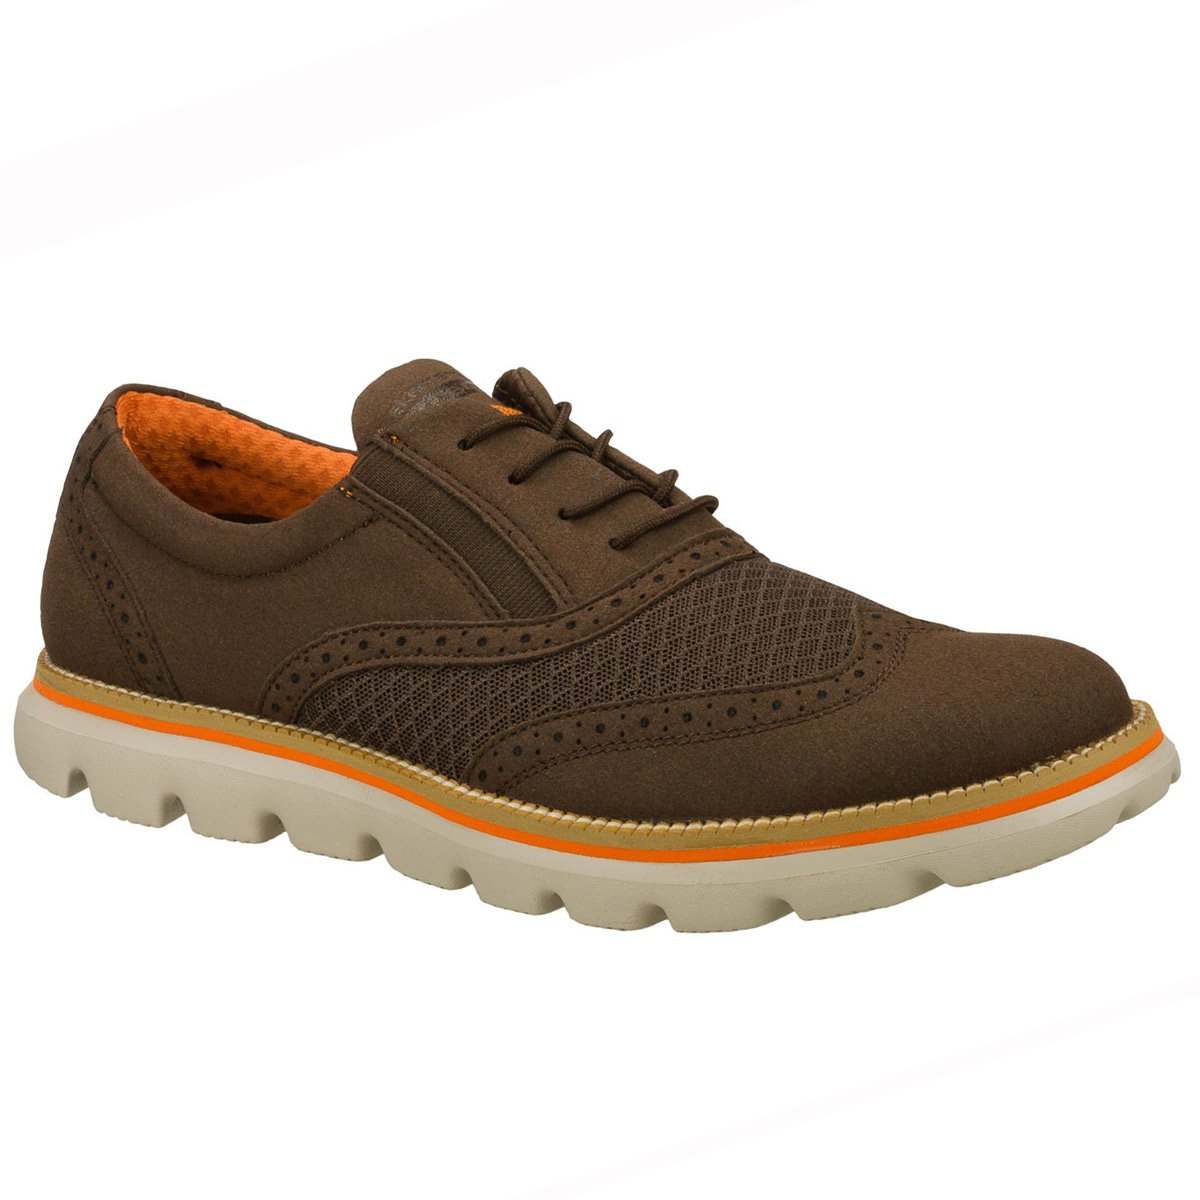 Choclo Casual Skechers